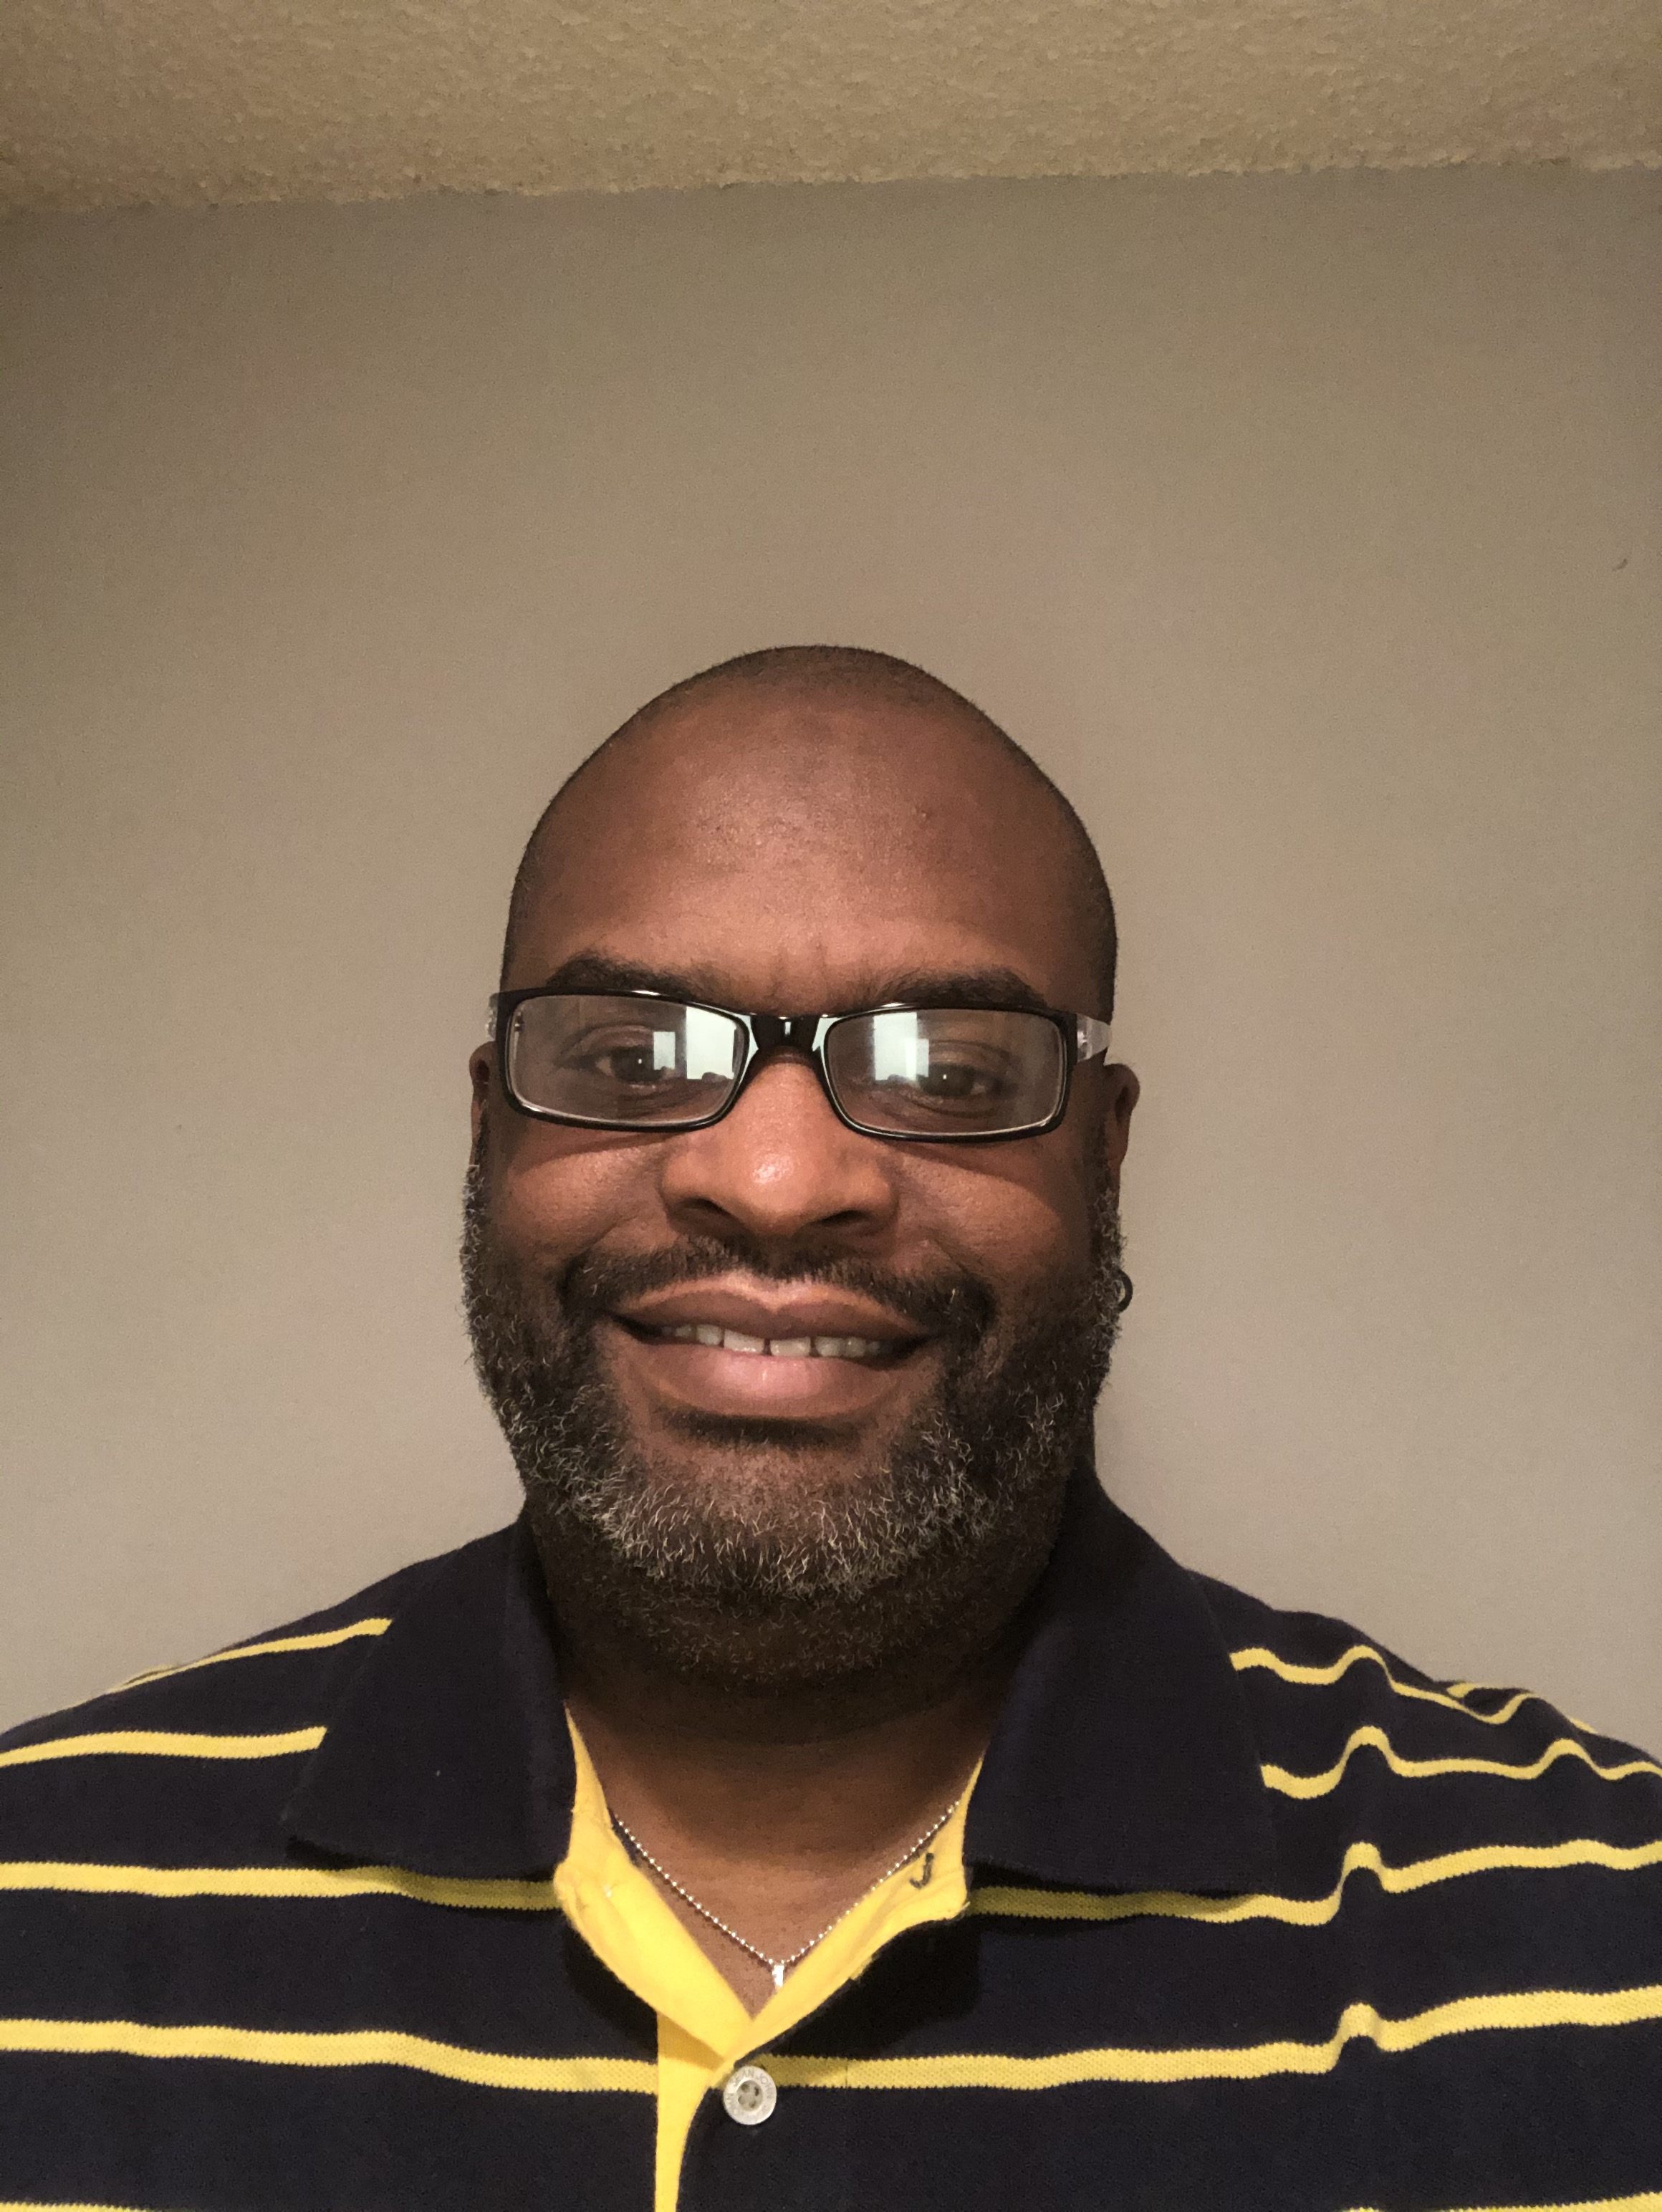 Closeup picture of black man smiling wtih glasses and black and yellow striped polo shirt 